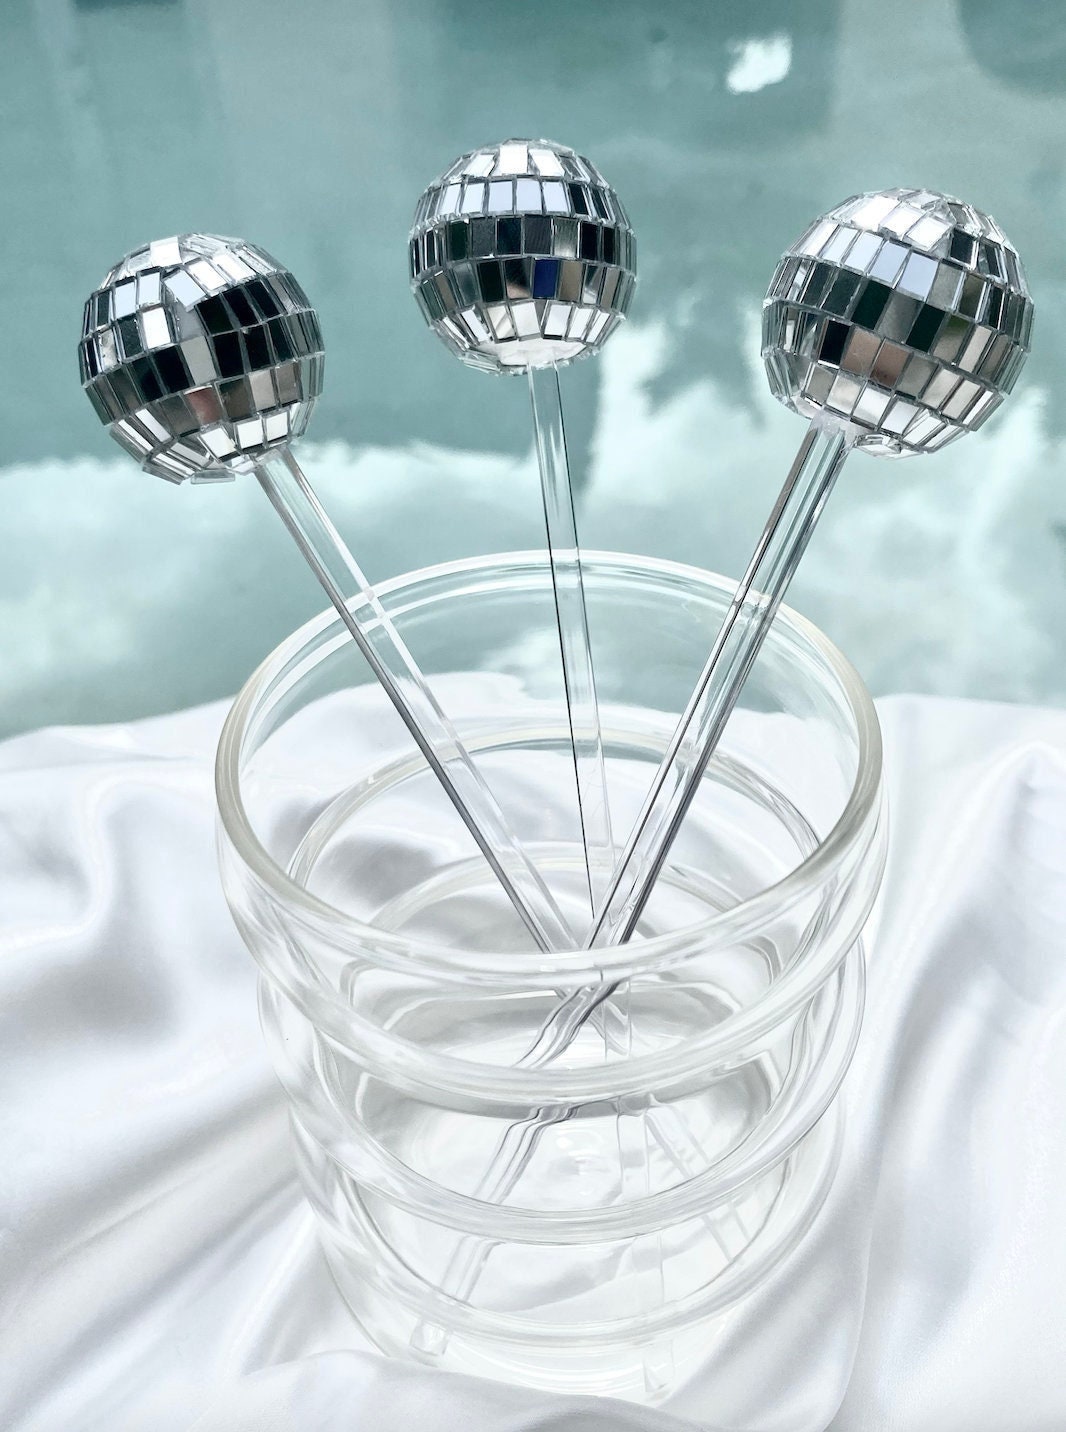 Cocktail Stirrer Round Top Swizzle Sticks Muticolored Disco Ball Drink  Mixing Stirrers for 1970s Disco Party Home Bar Shop Use